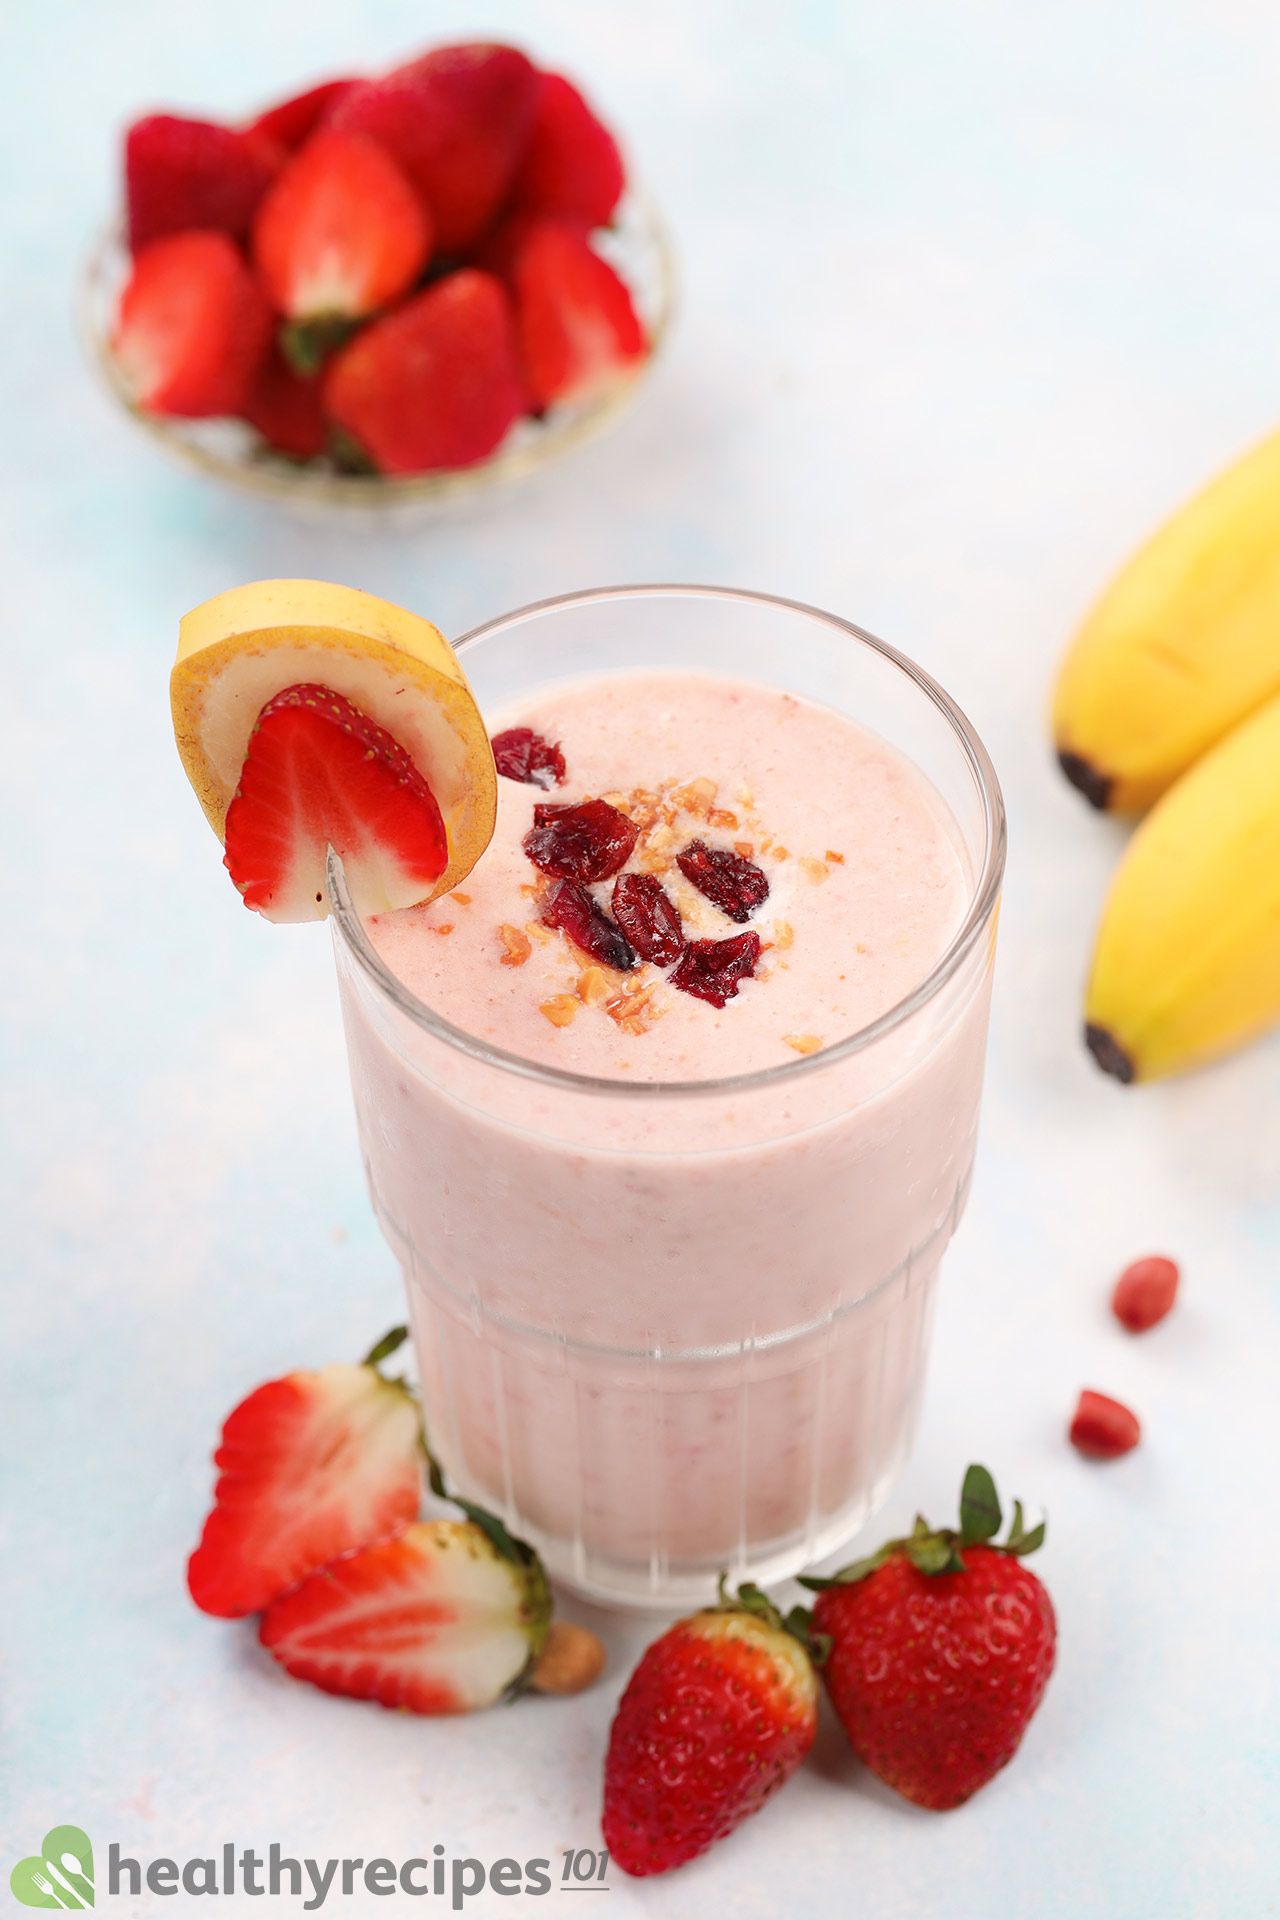 Is Strawberry Peanut Butter Smoothie Healthy